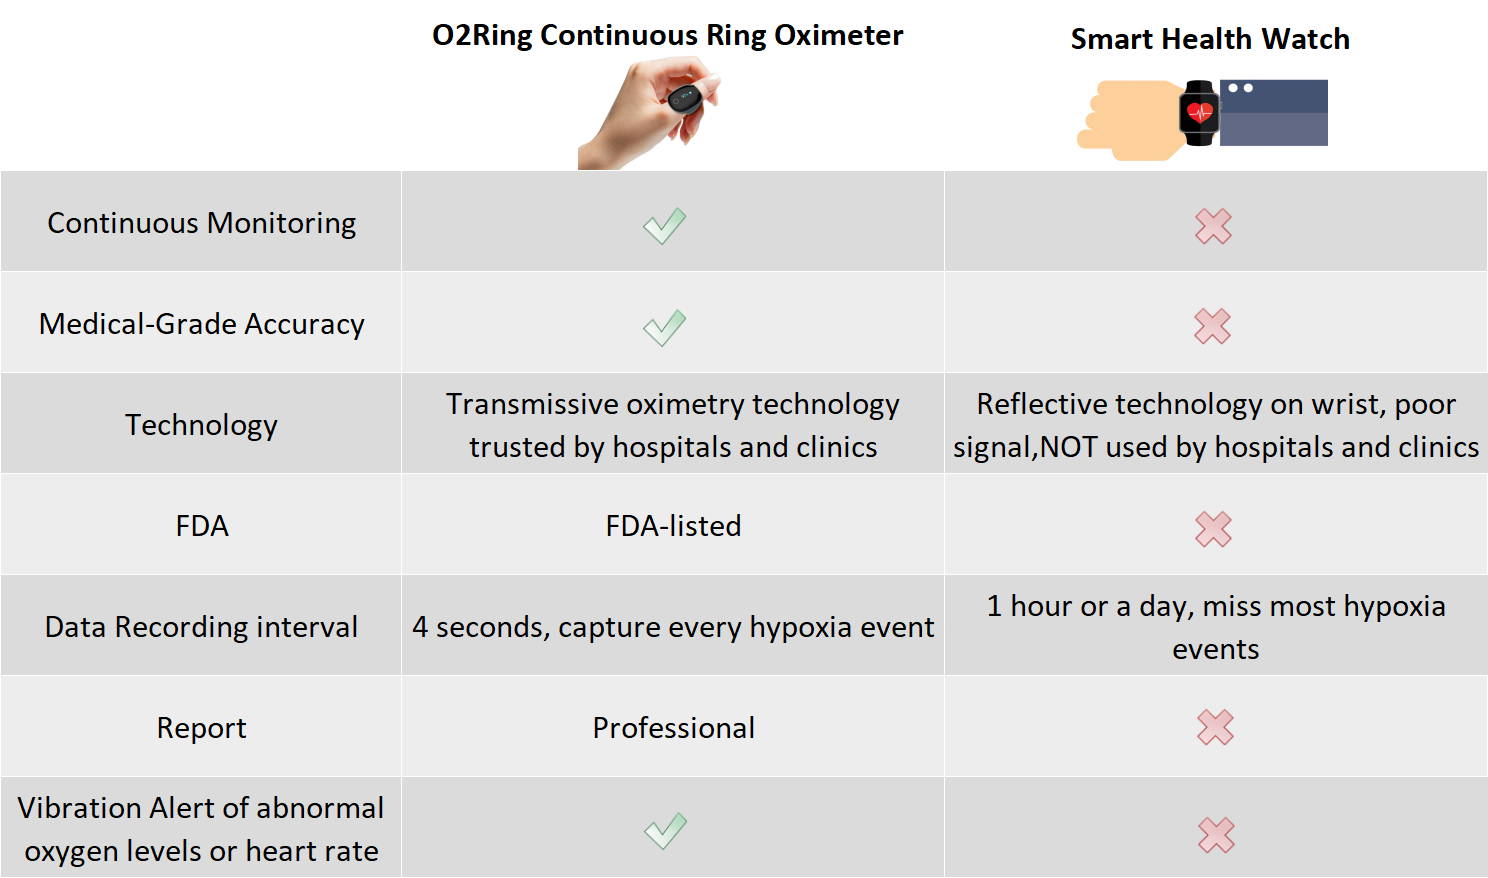 The comparison chart of monitor mode, accuracy, technology, FDA, recording interval and other core features between Wellue O2 ring and smart watch.